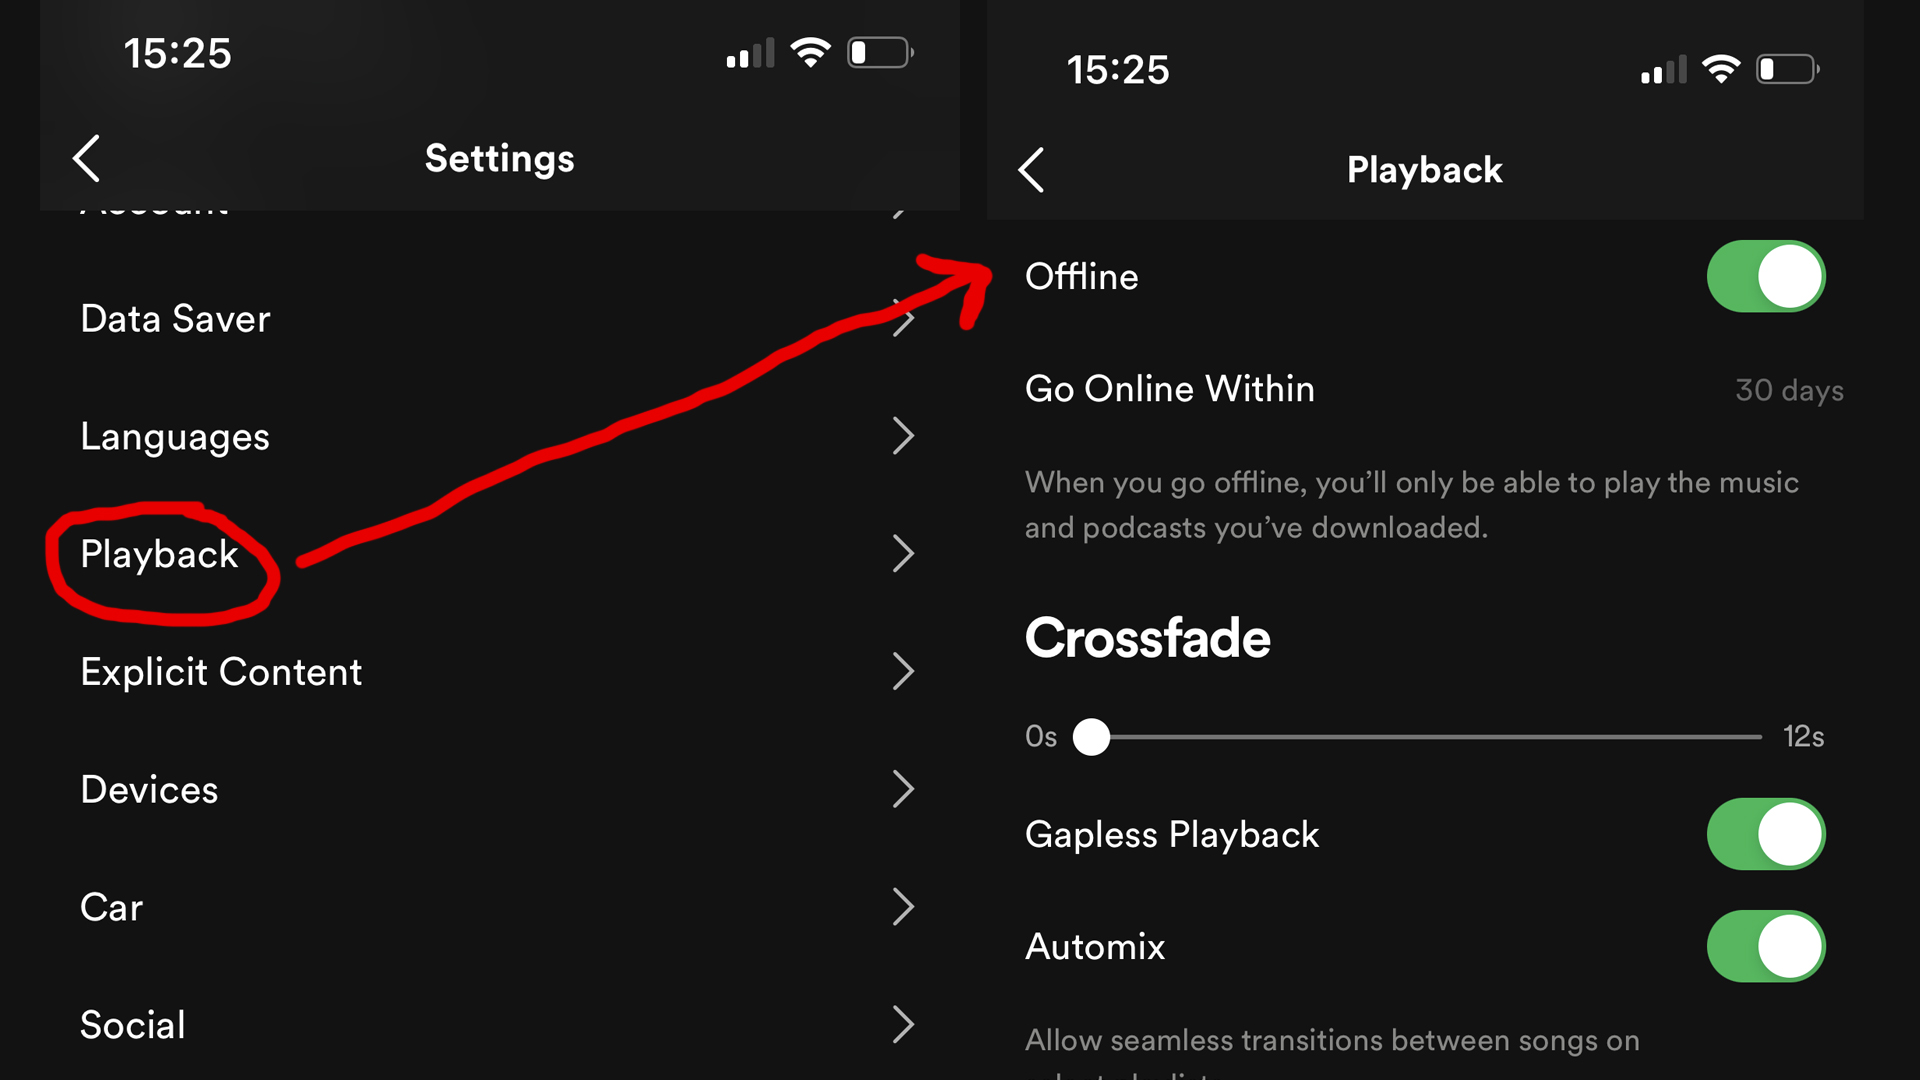 a screenshot of the spotify app on mobile